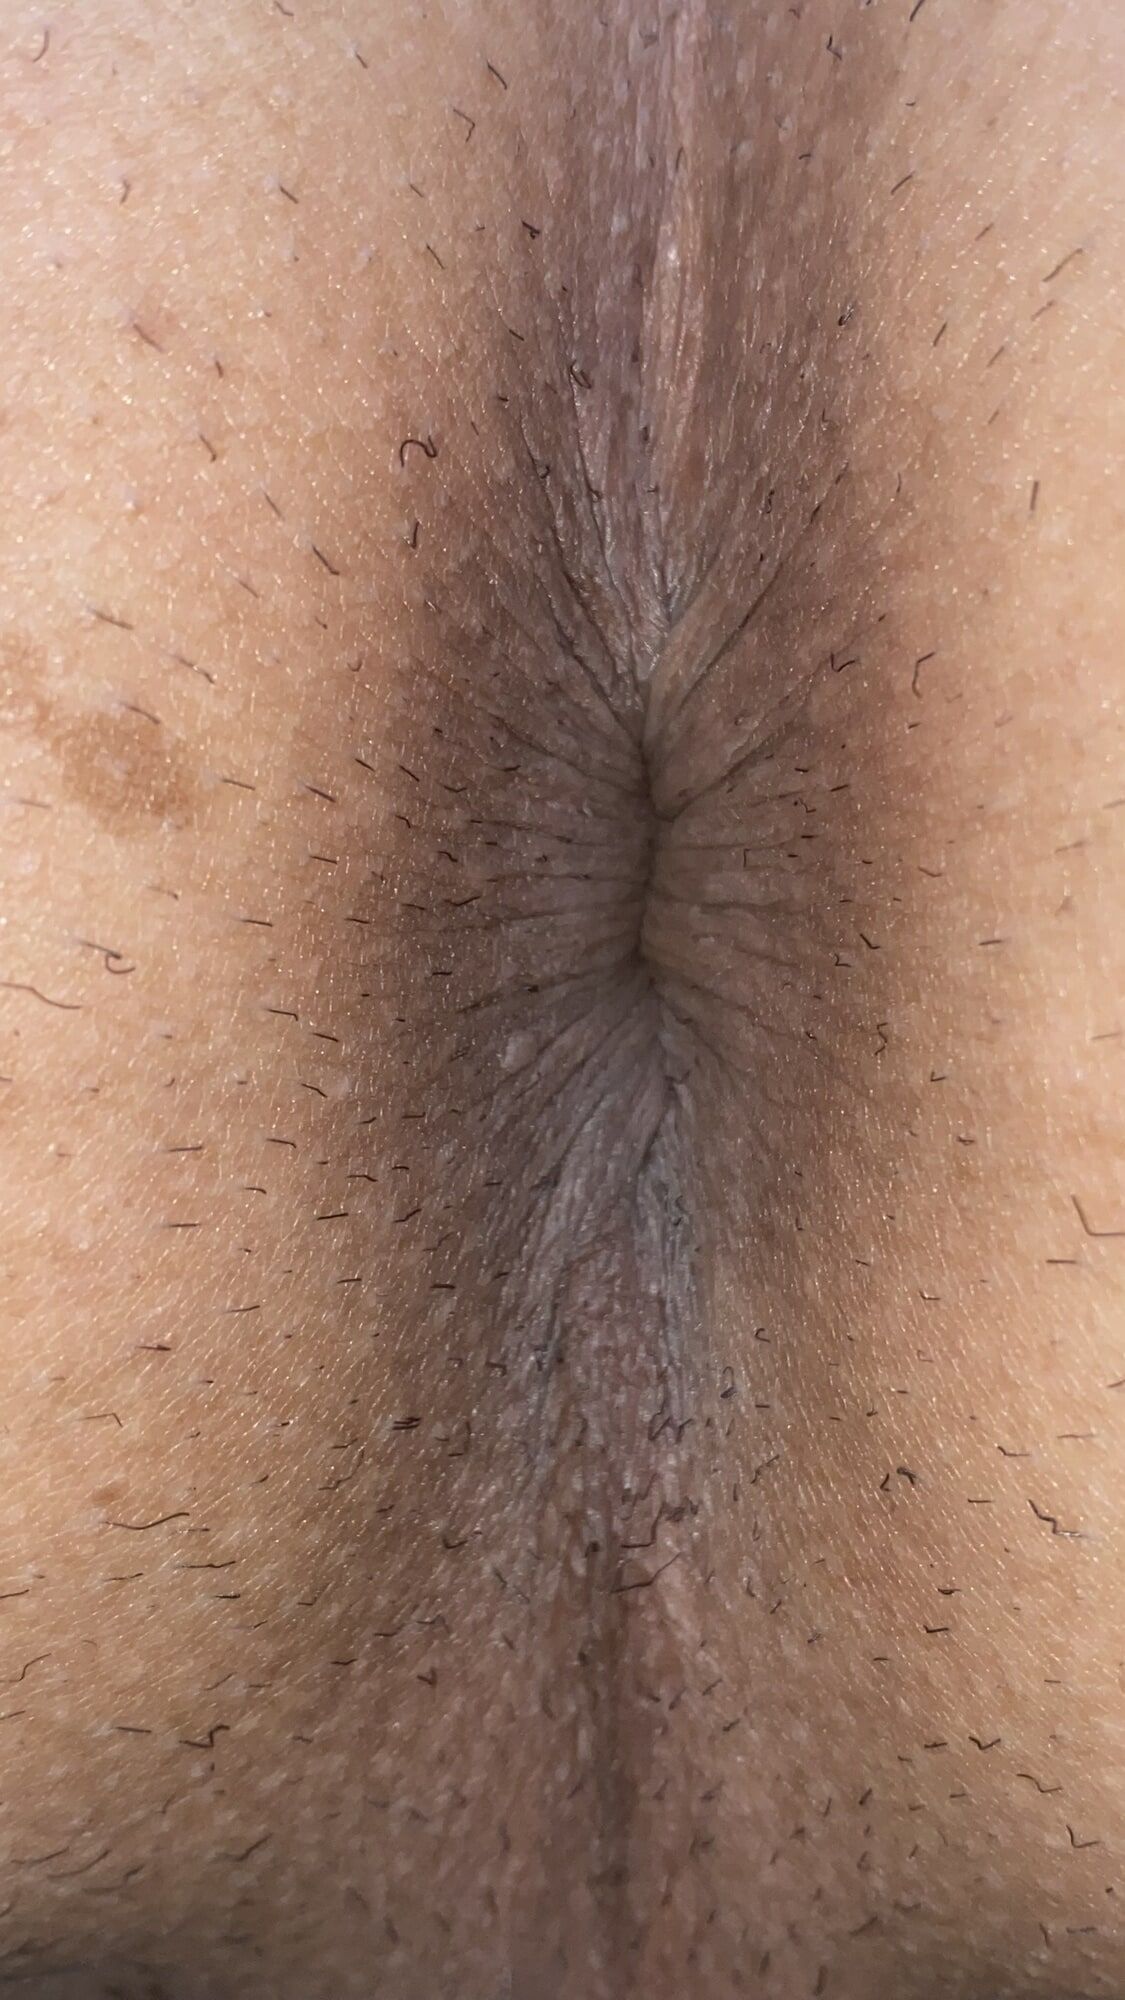 Recent anal feature